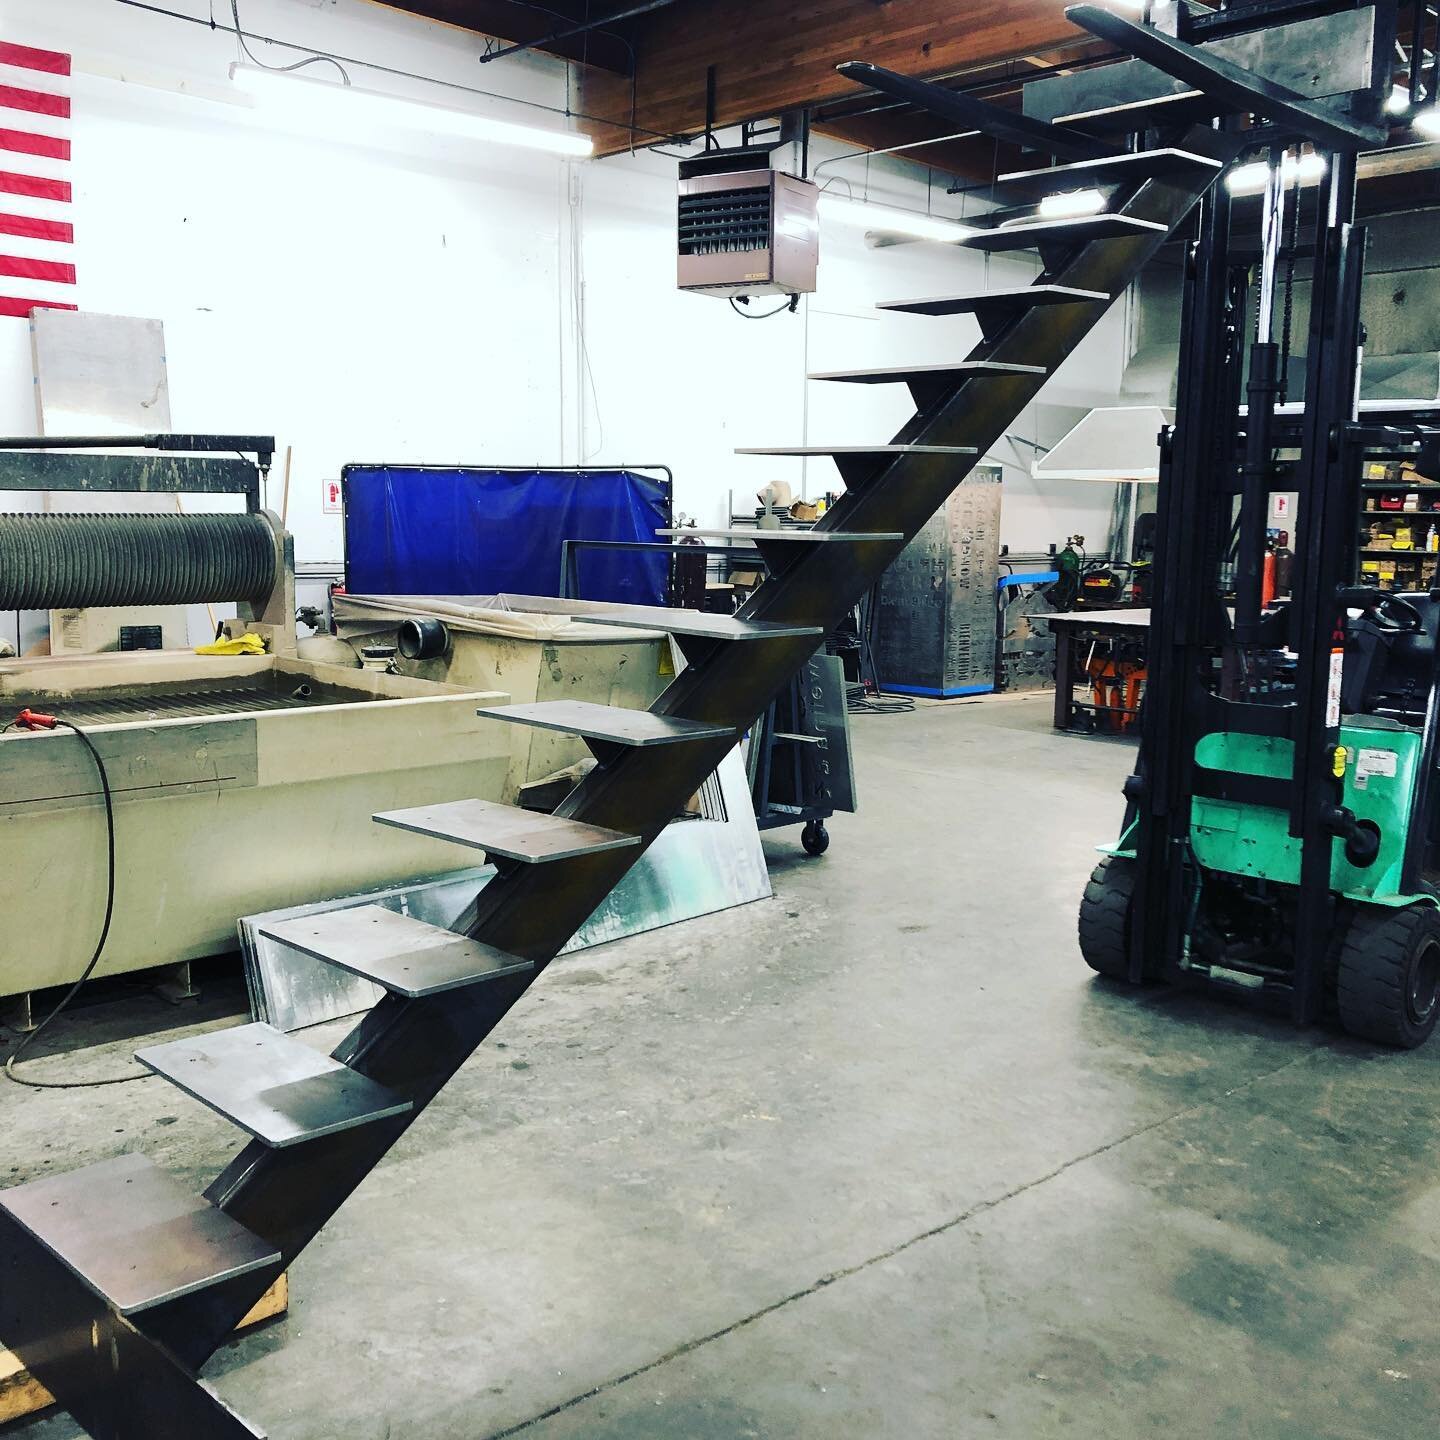 This staircase is making me think we need a rooftop deck.
#architecture #interiordesign #steel #steelfabrication #custom #metalfabrication #welding #architecturalmetalwork #stairs #stairdesign #stairwaytoheaven